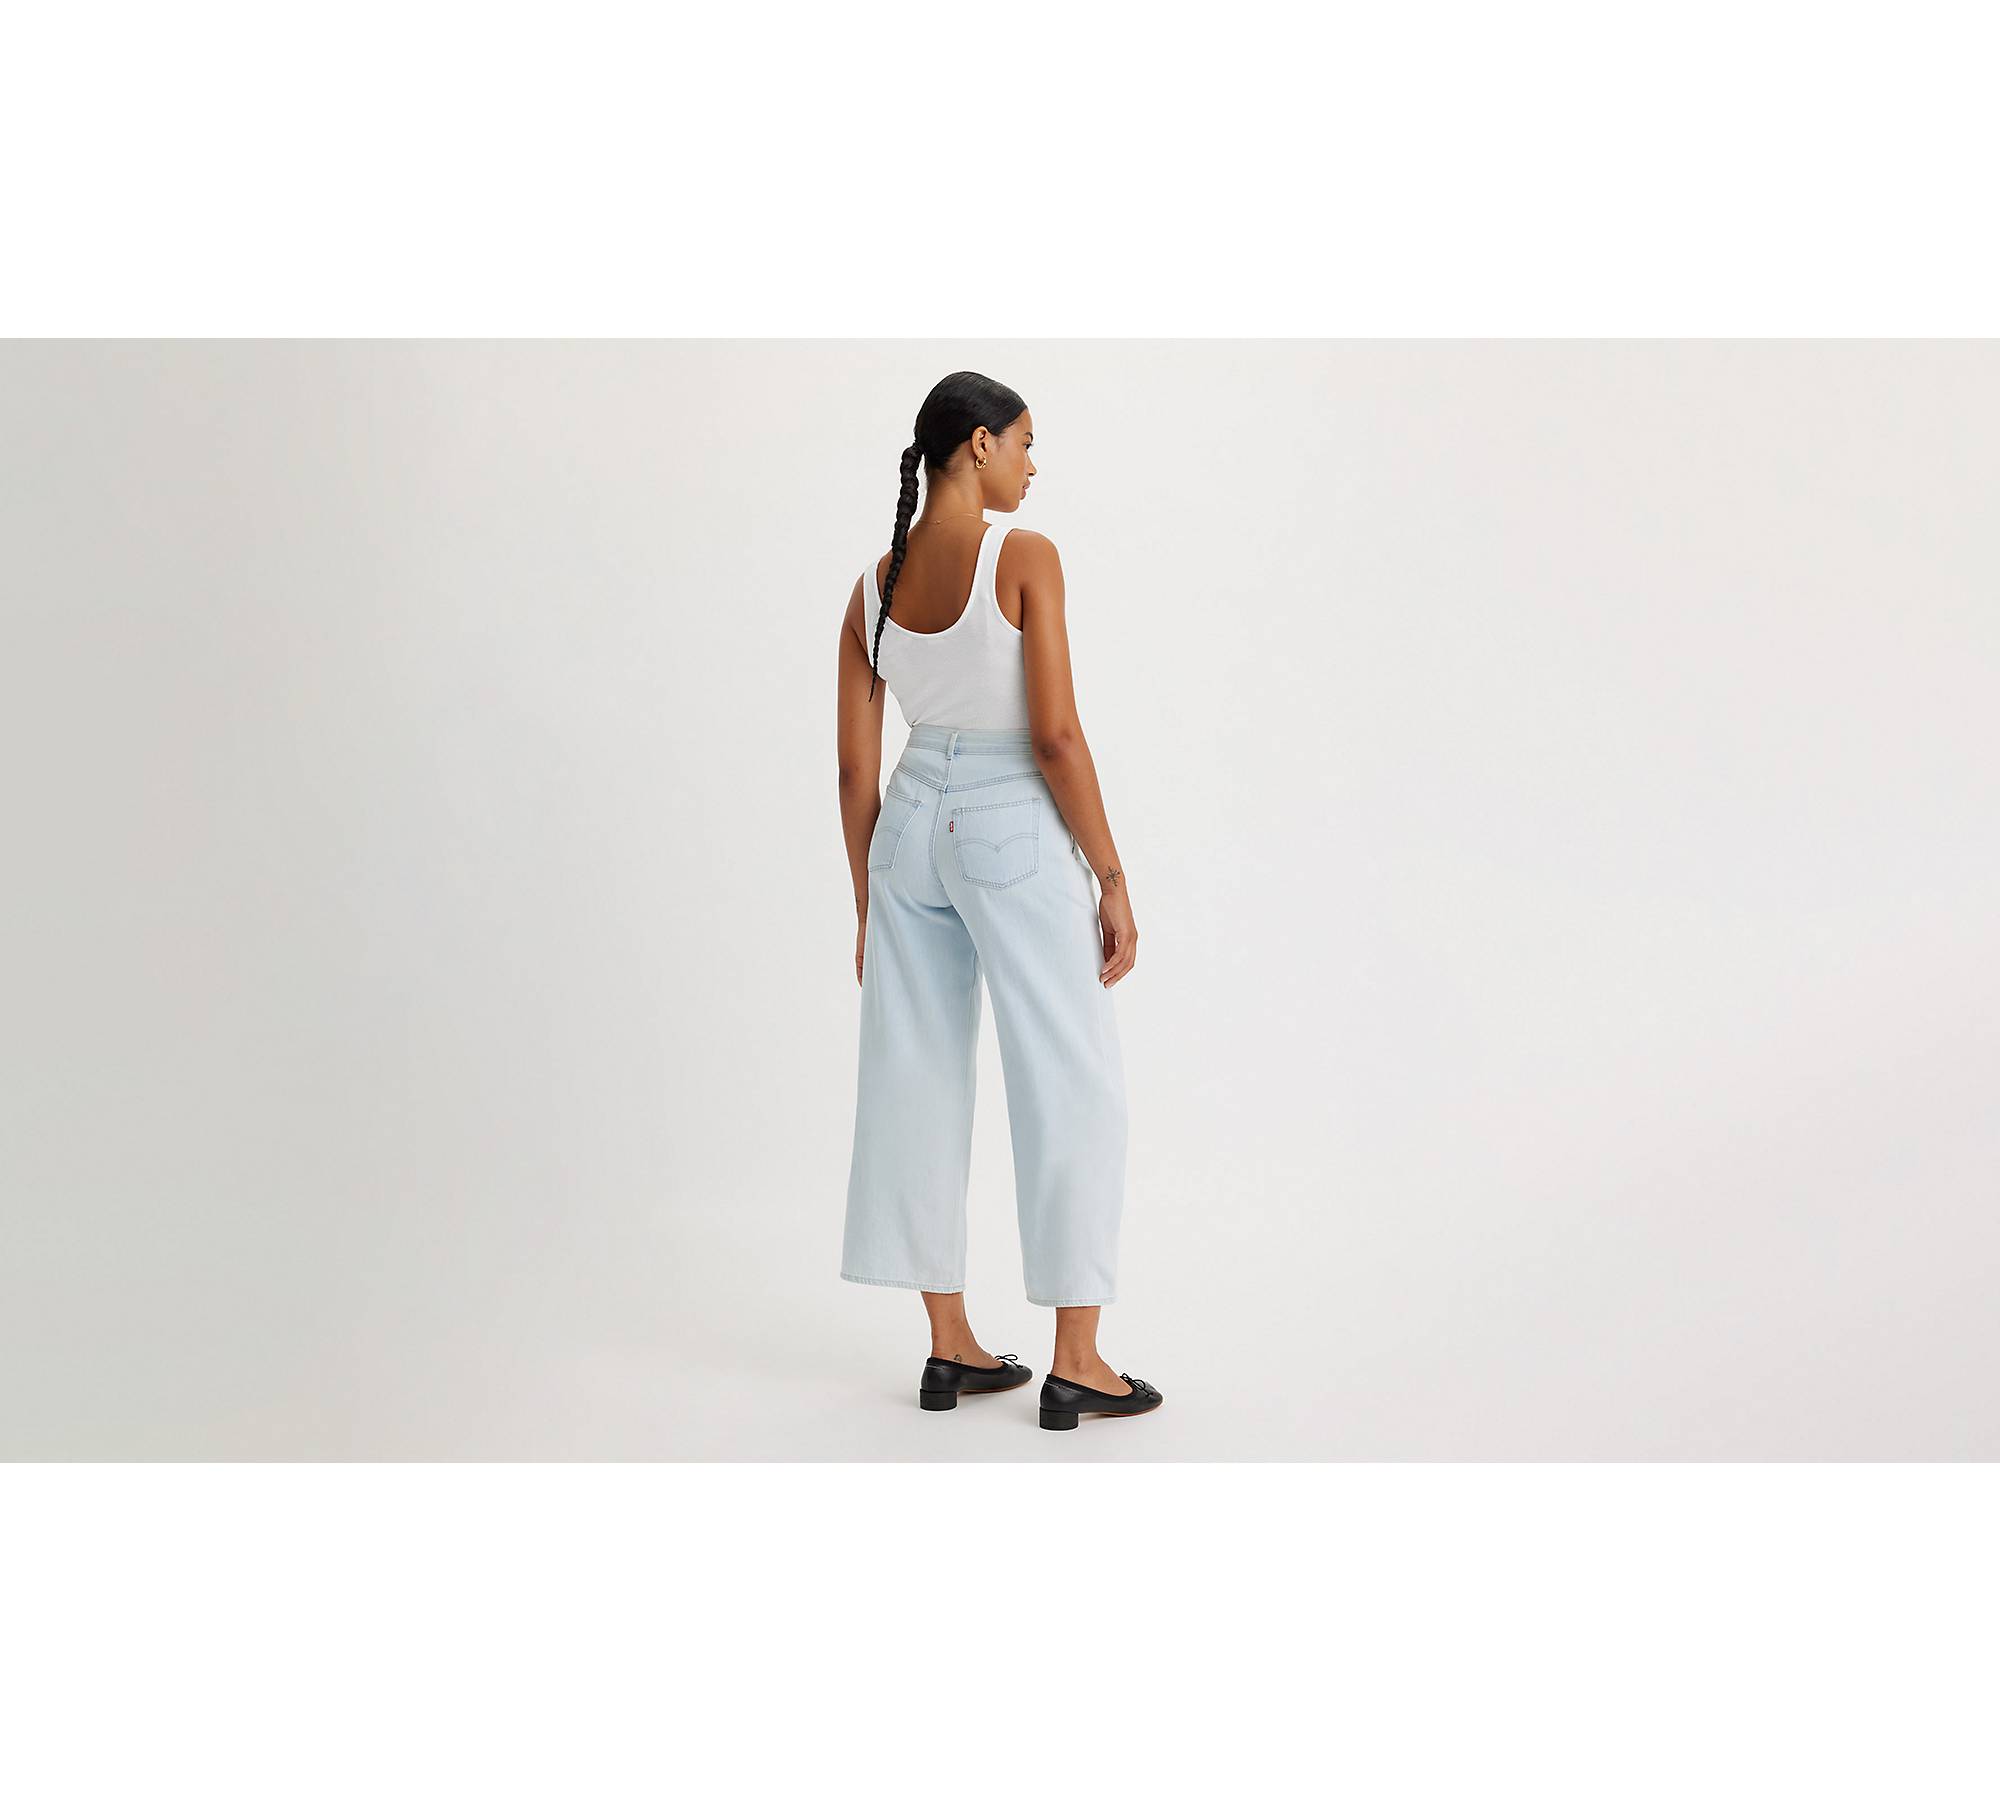 Baggy Featherweight Women's Jeans - Light Wash | Levi's® US